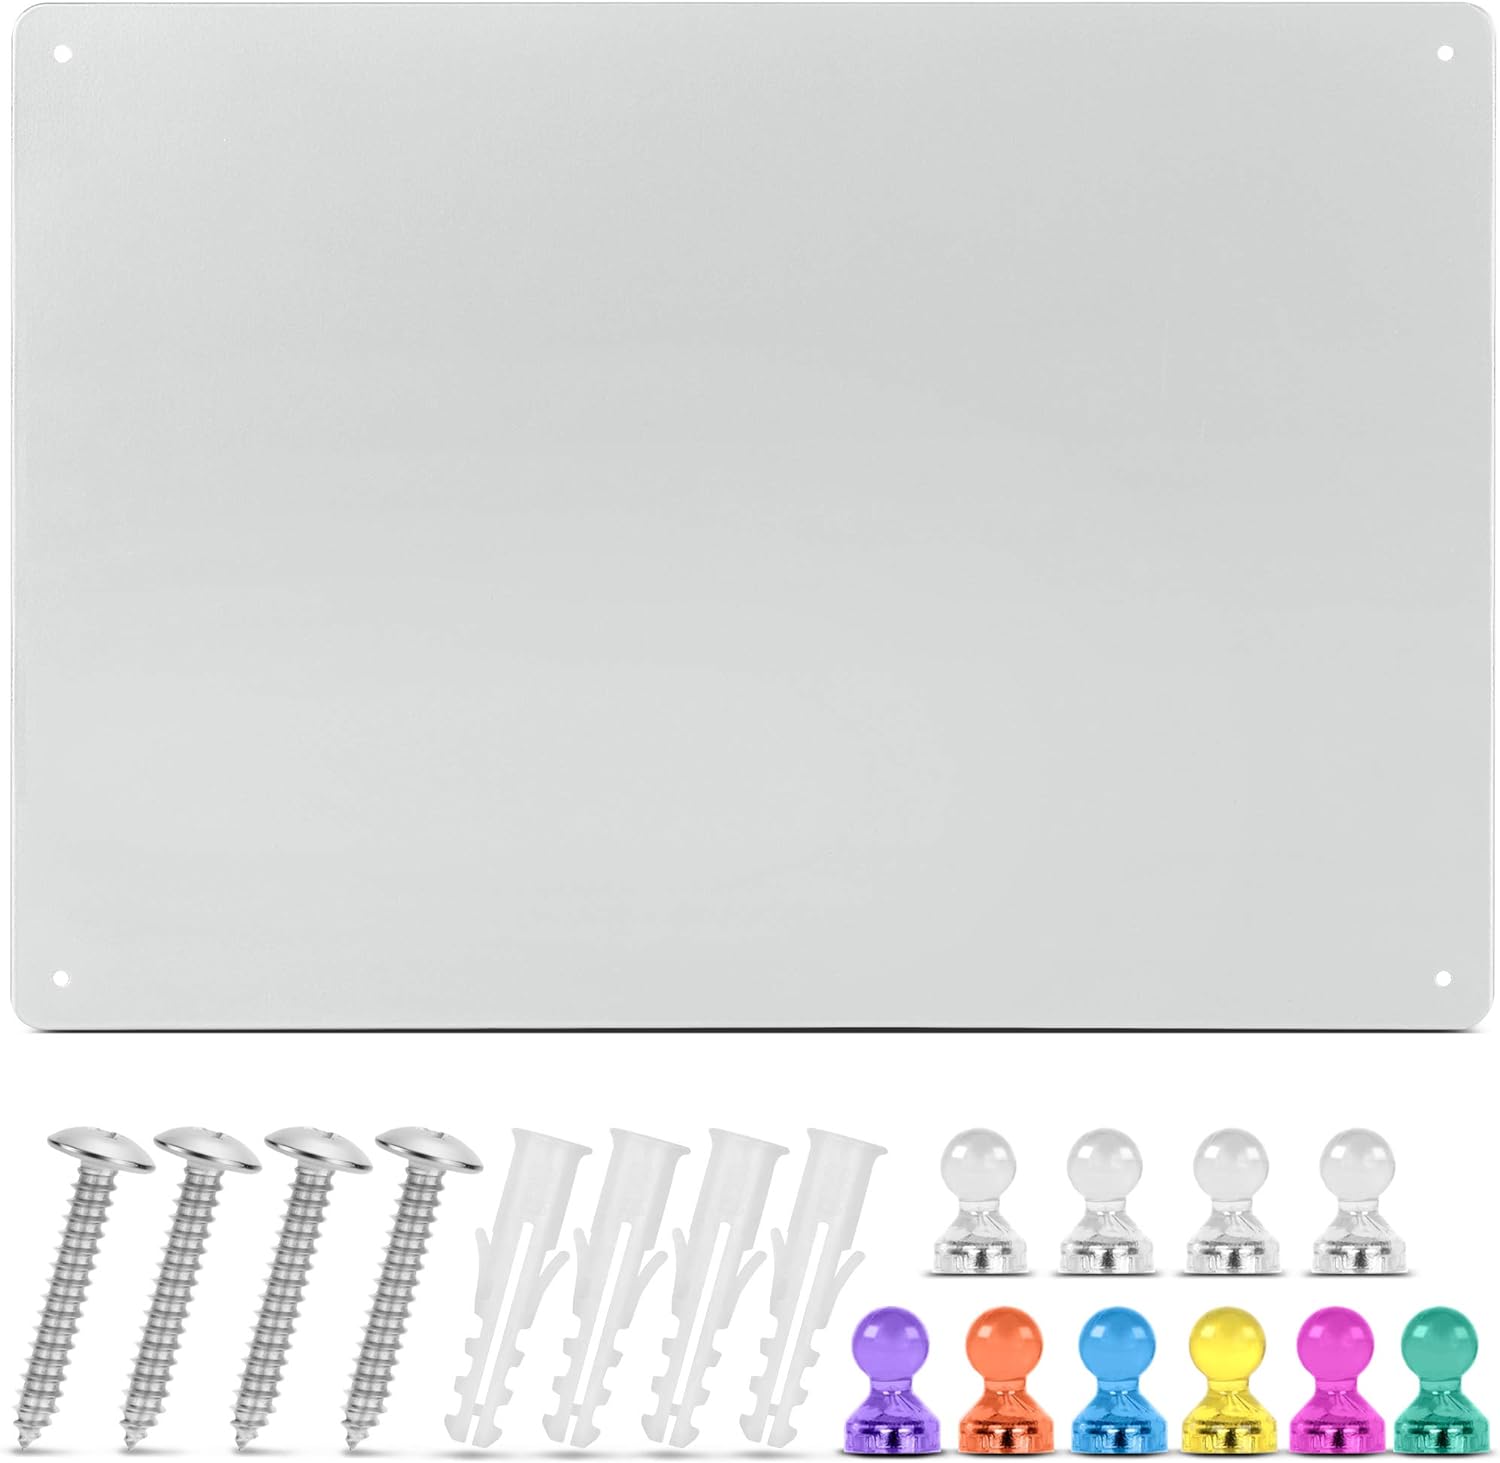 Magnetic Metal Board 17.5 x 12 - Magnet Bulletin Vision Memo Board Includes 10 Push Pin Magnets and Hanging Hardware Kit for Easy Installation